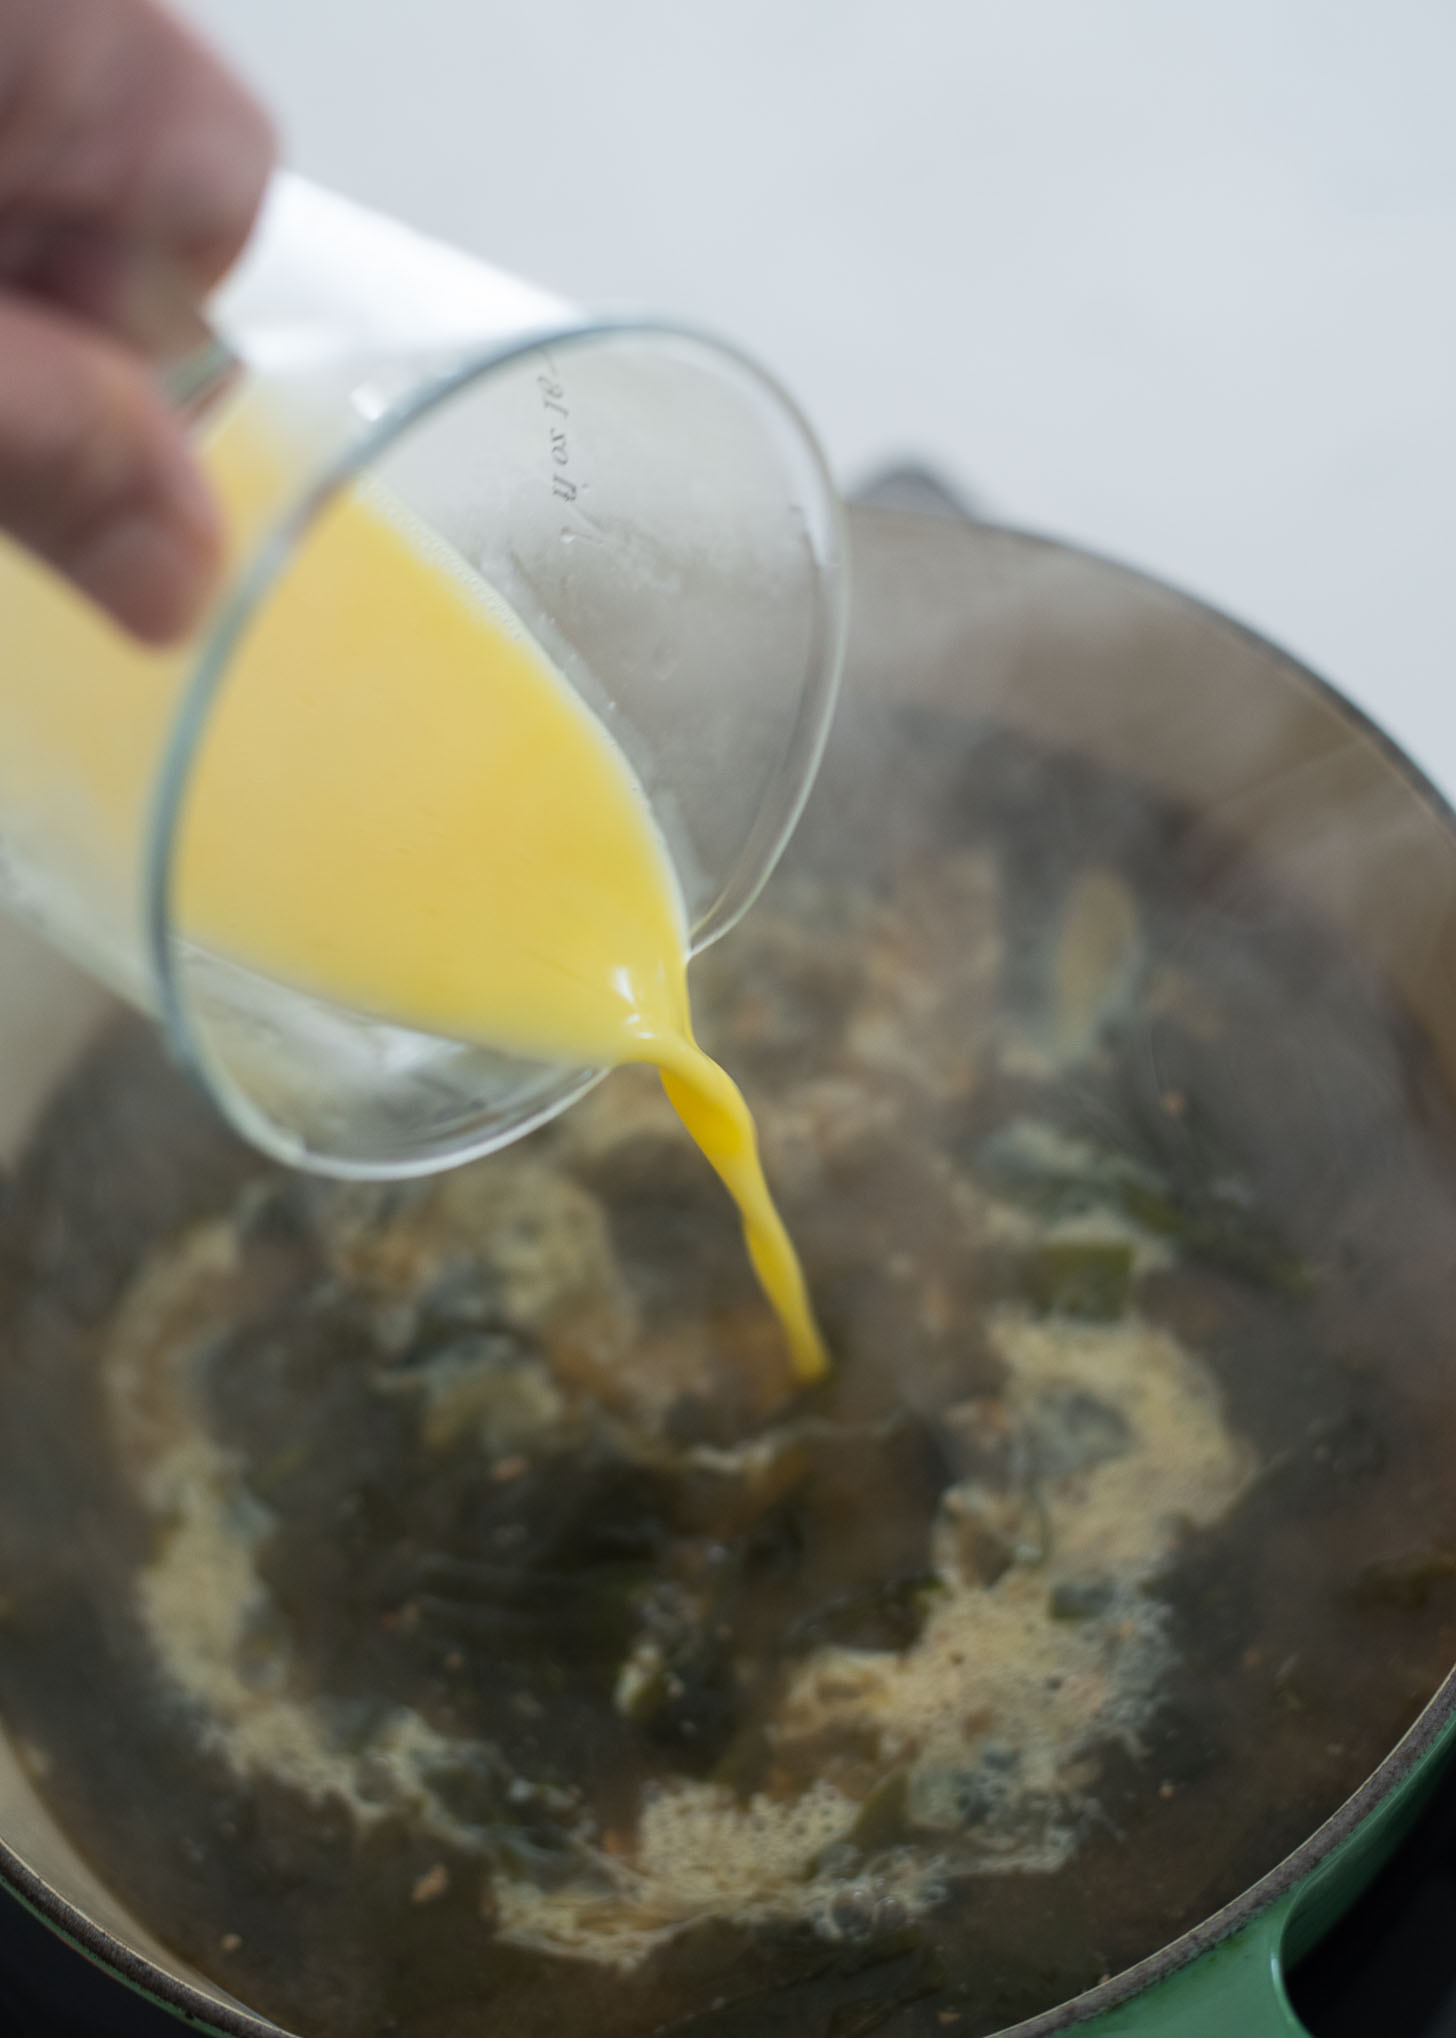 Beaten eggs are slowly added and swirled in a seaweed soup.